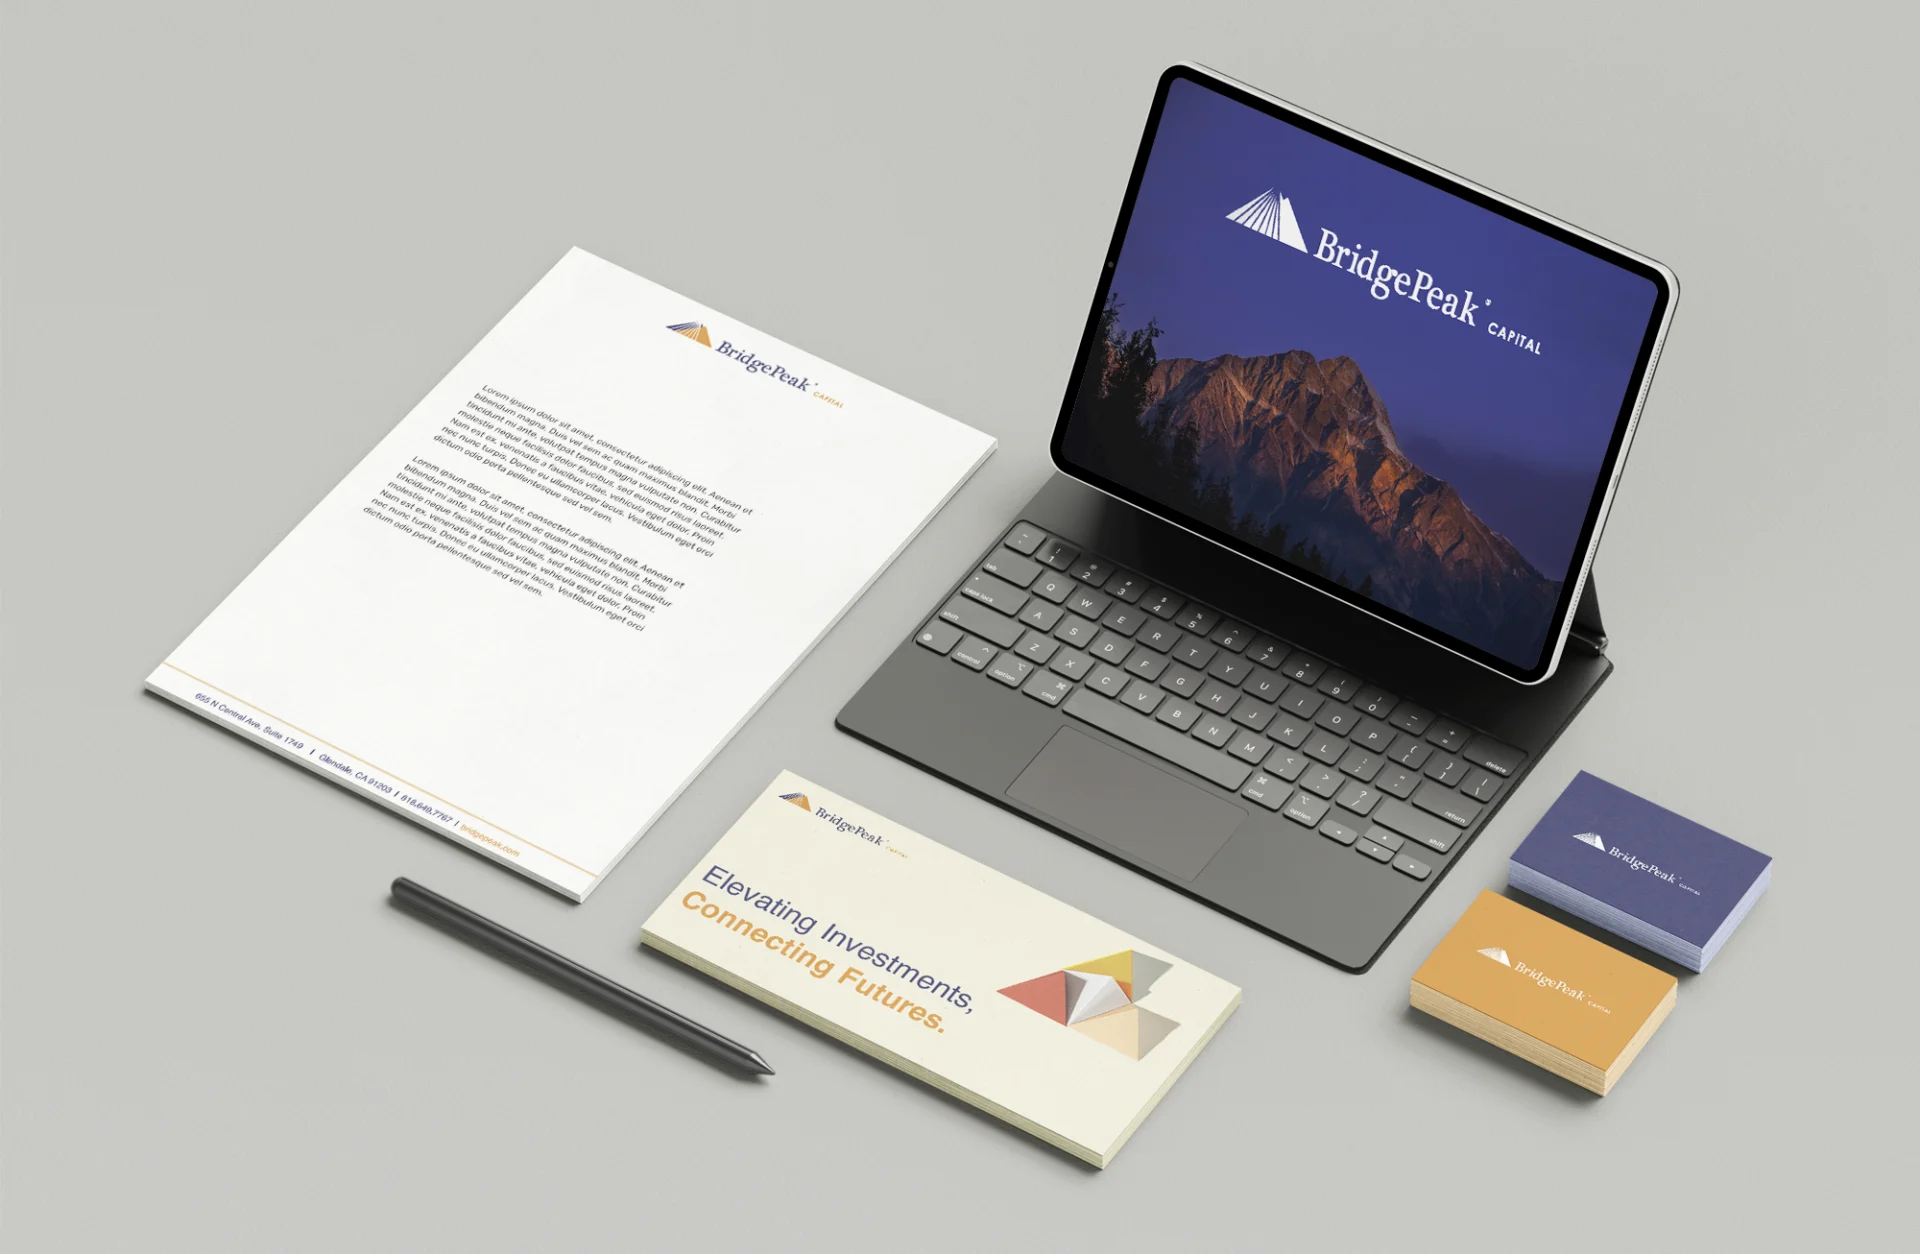 A financial company print branding collateral and digital content.